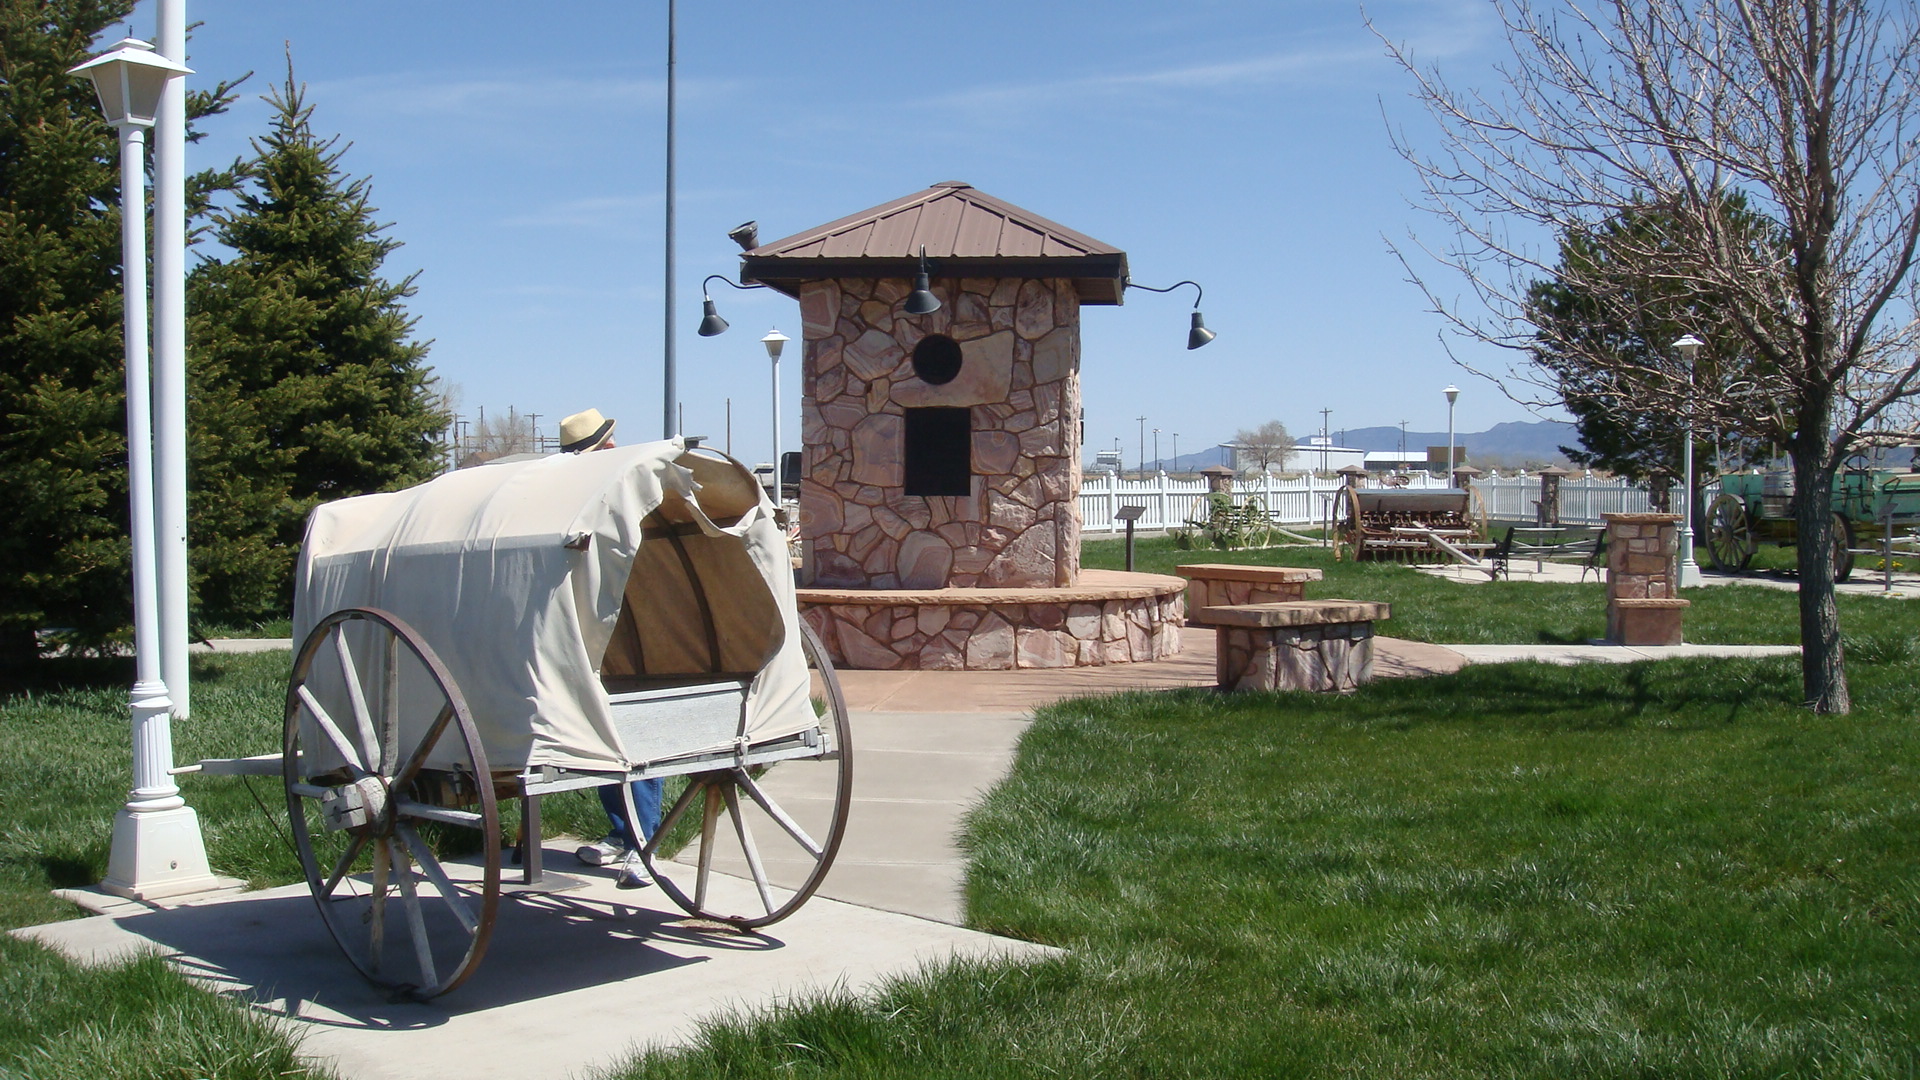 Handcart and the central monument at the Terry Family Heritage Park